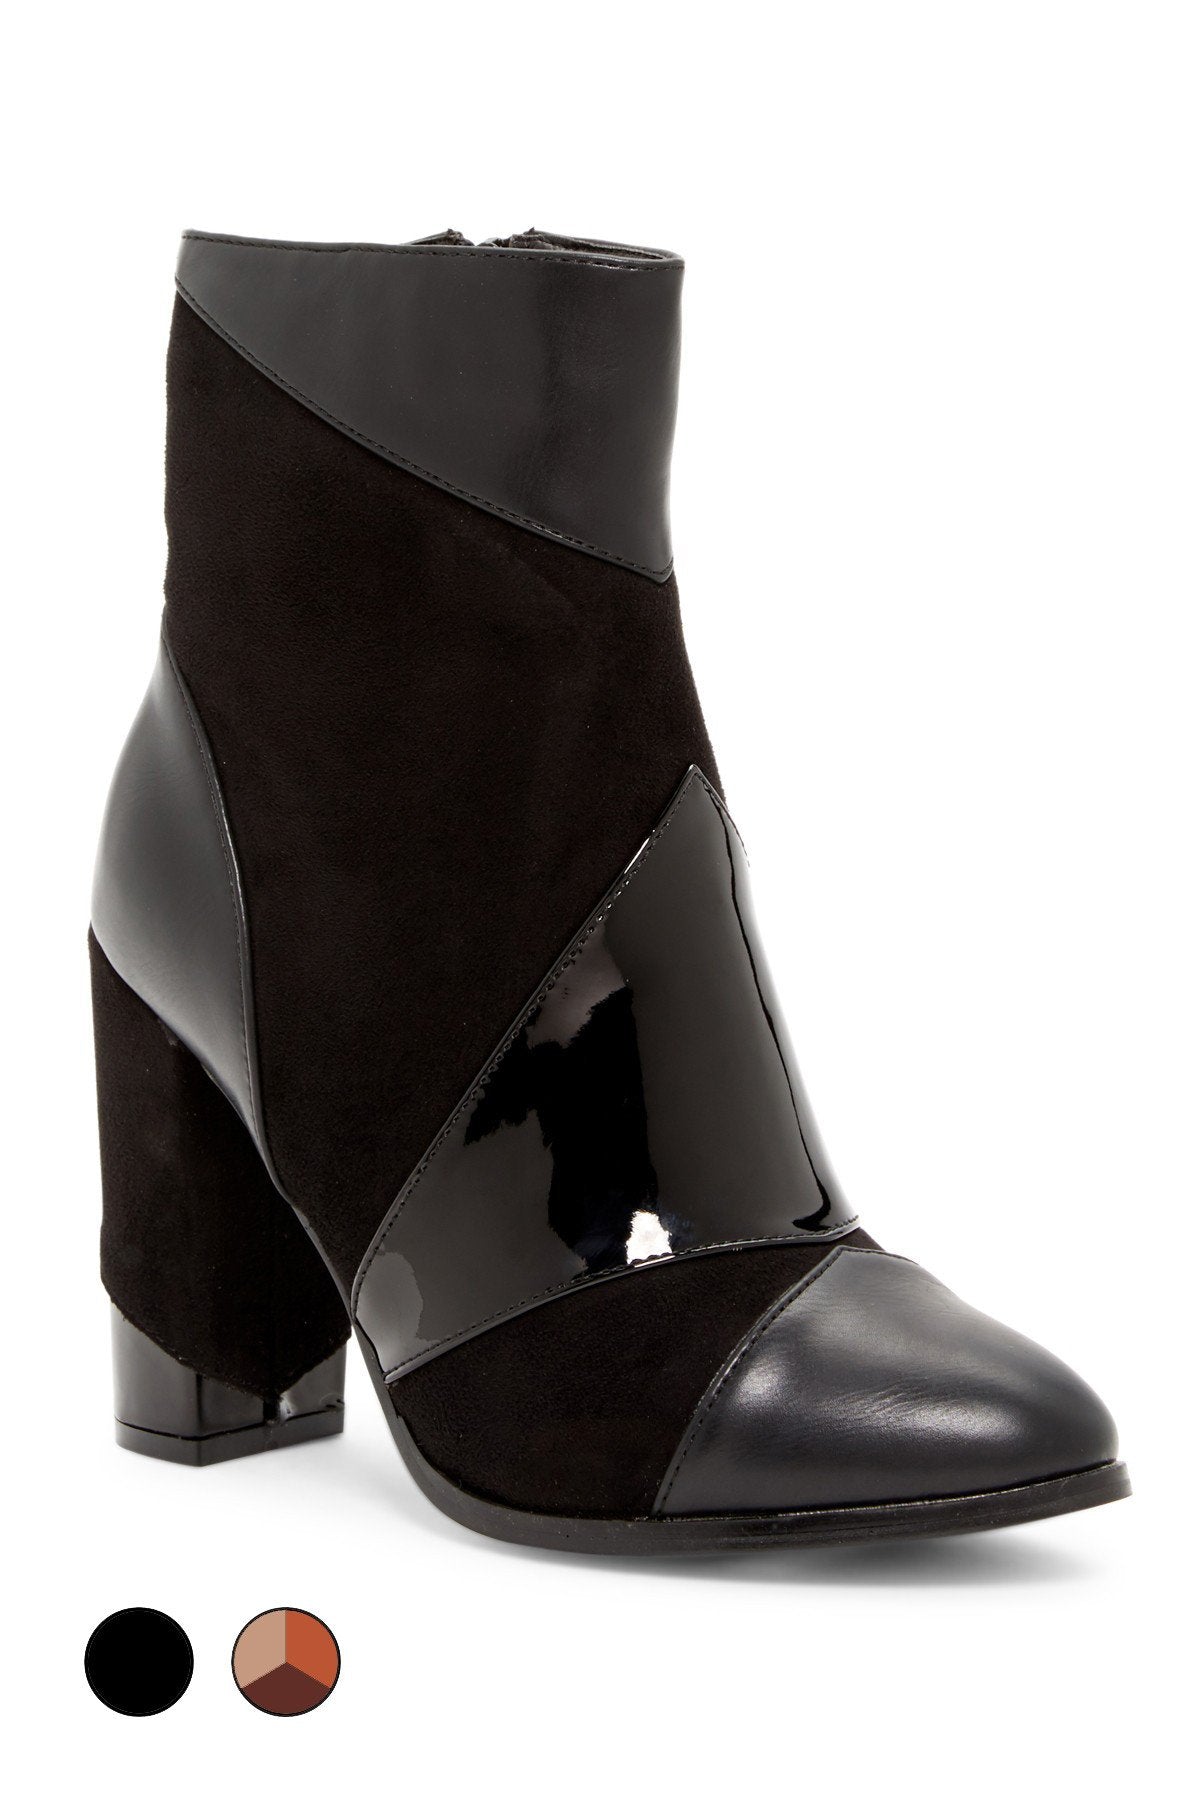 OLYGPATCH vegan leather ankle boot with a glossy patent toe cap and heel, set against a white background.